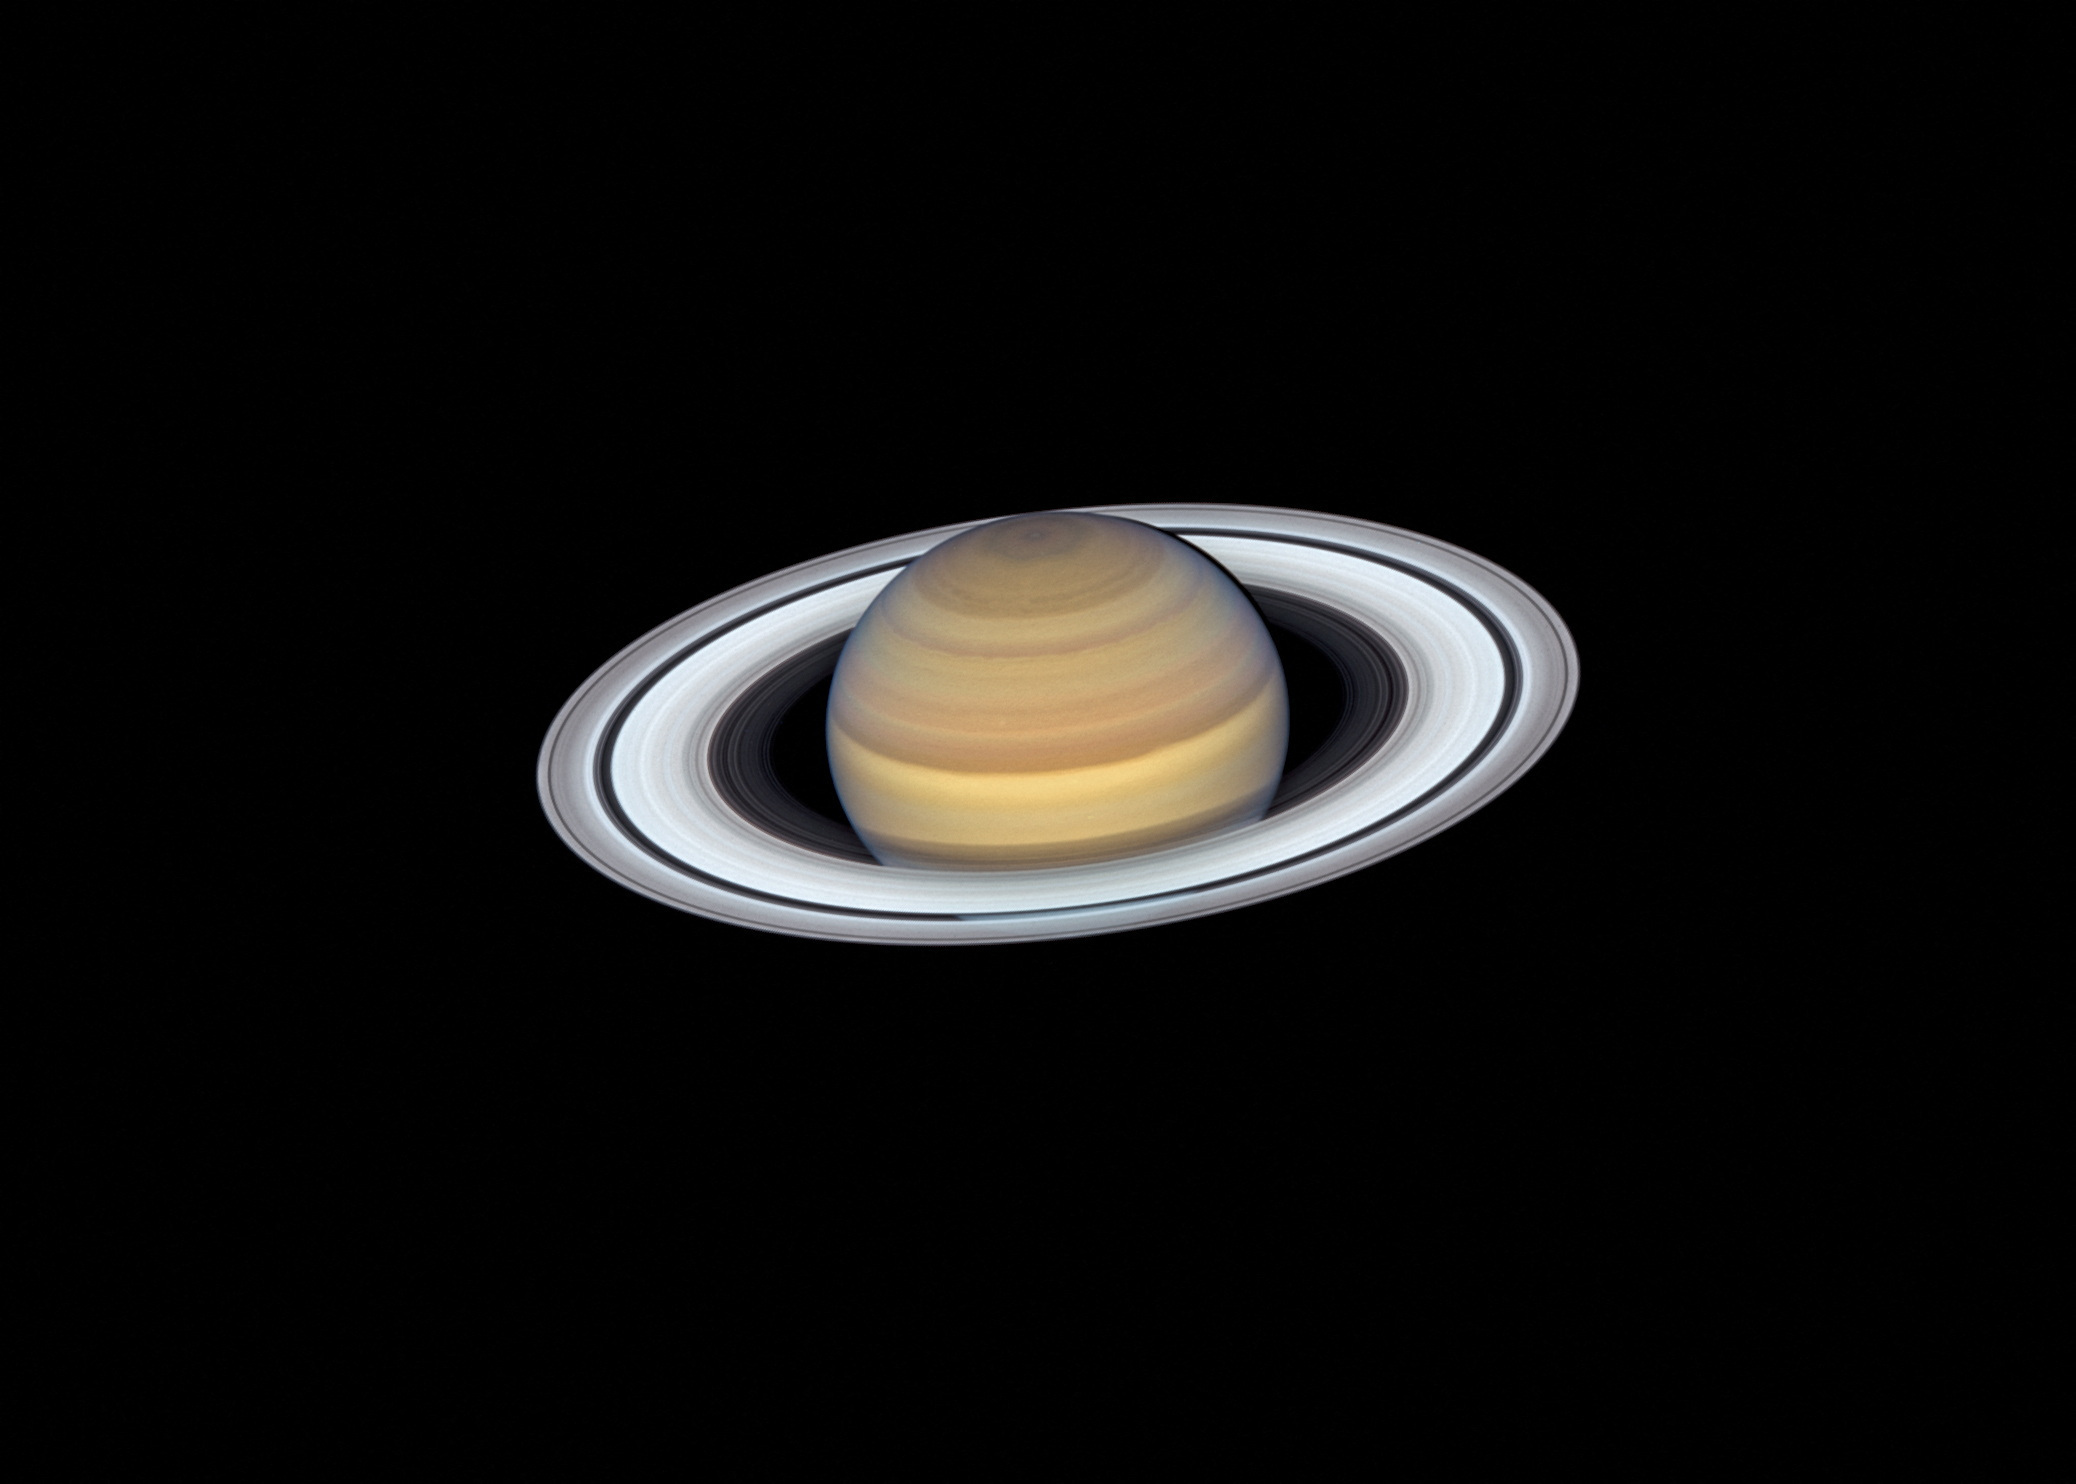 Saturn’s rings are seen as viewed by NASA’s Cassini spacecraft